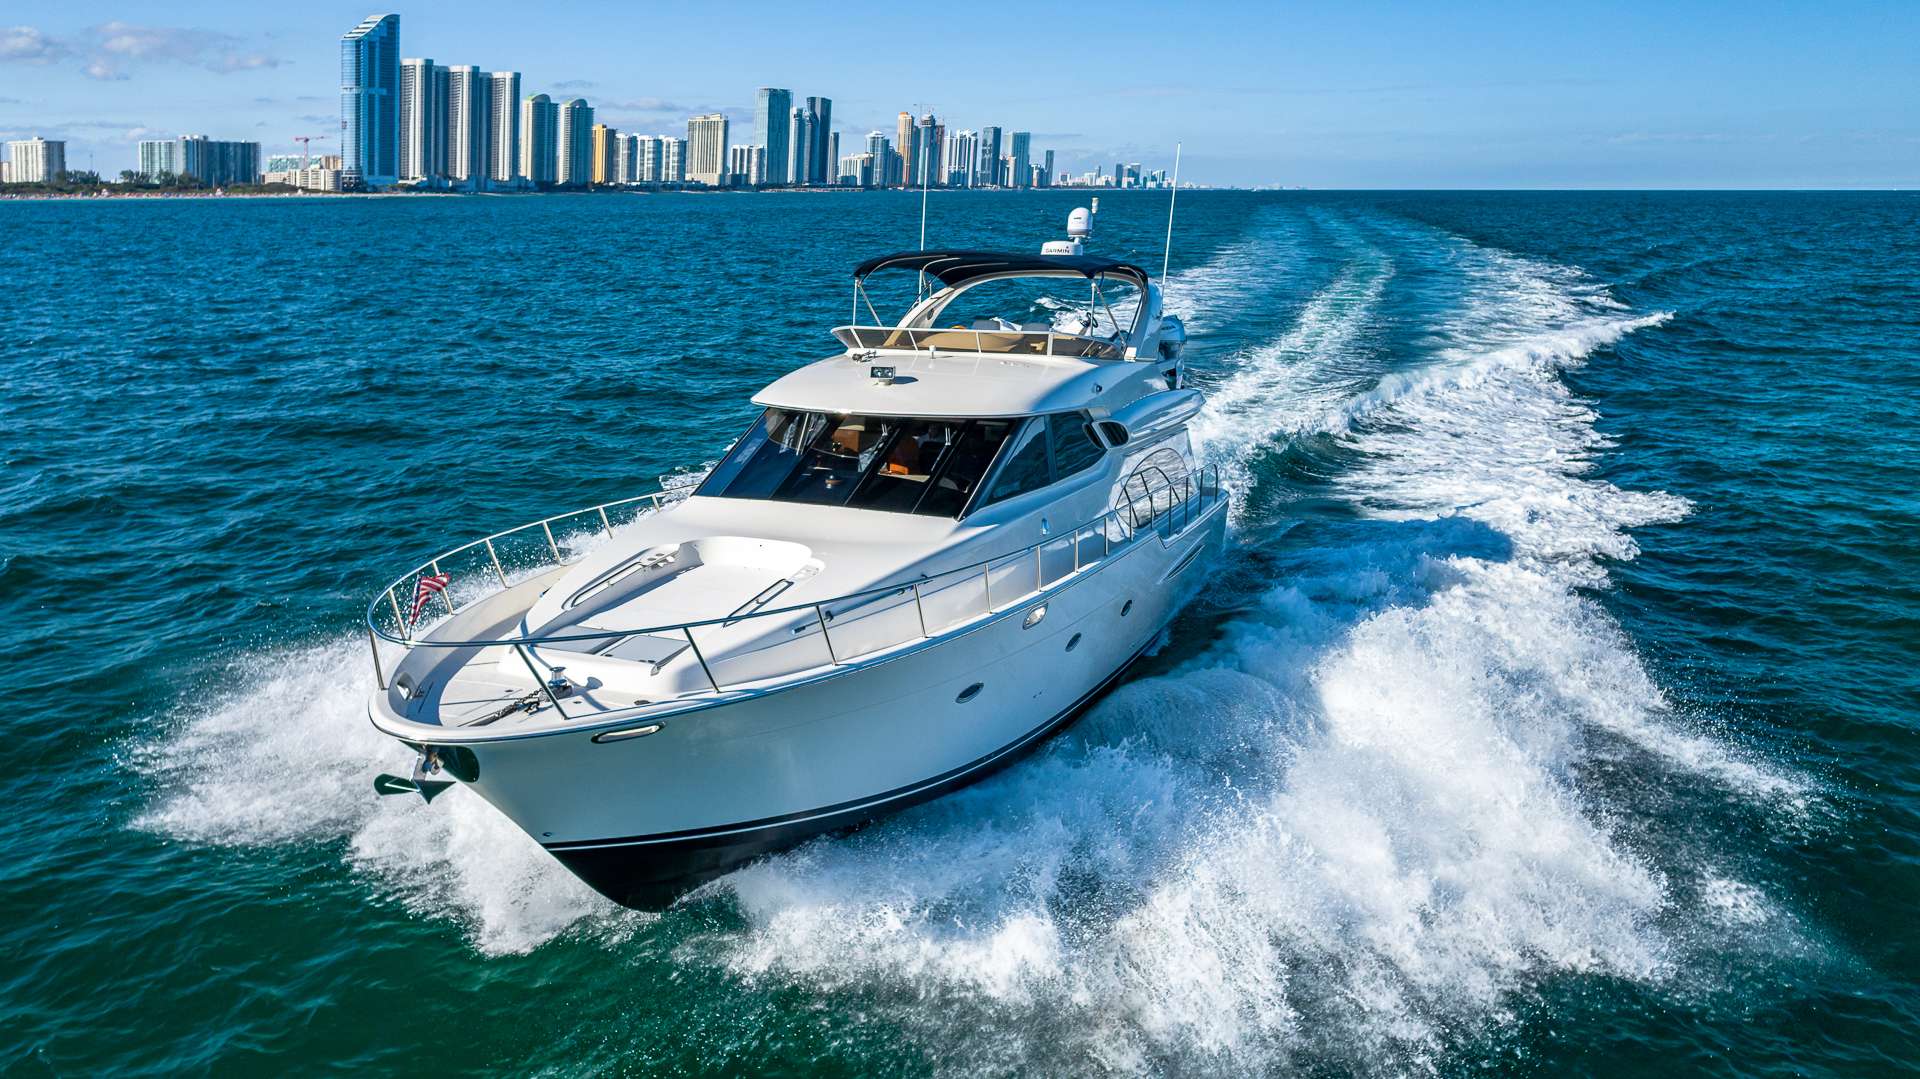 ELEGANT LADY - Yacht Charter Fort Lauderdale & Boat hire in Florida & Bahamas 1